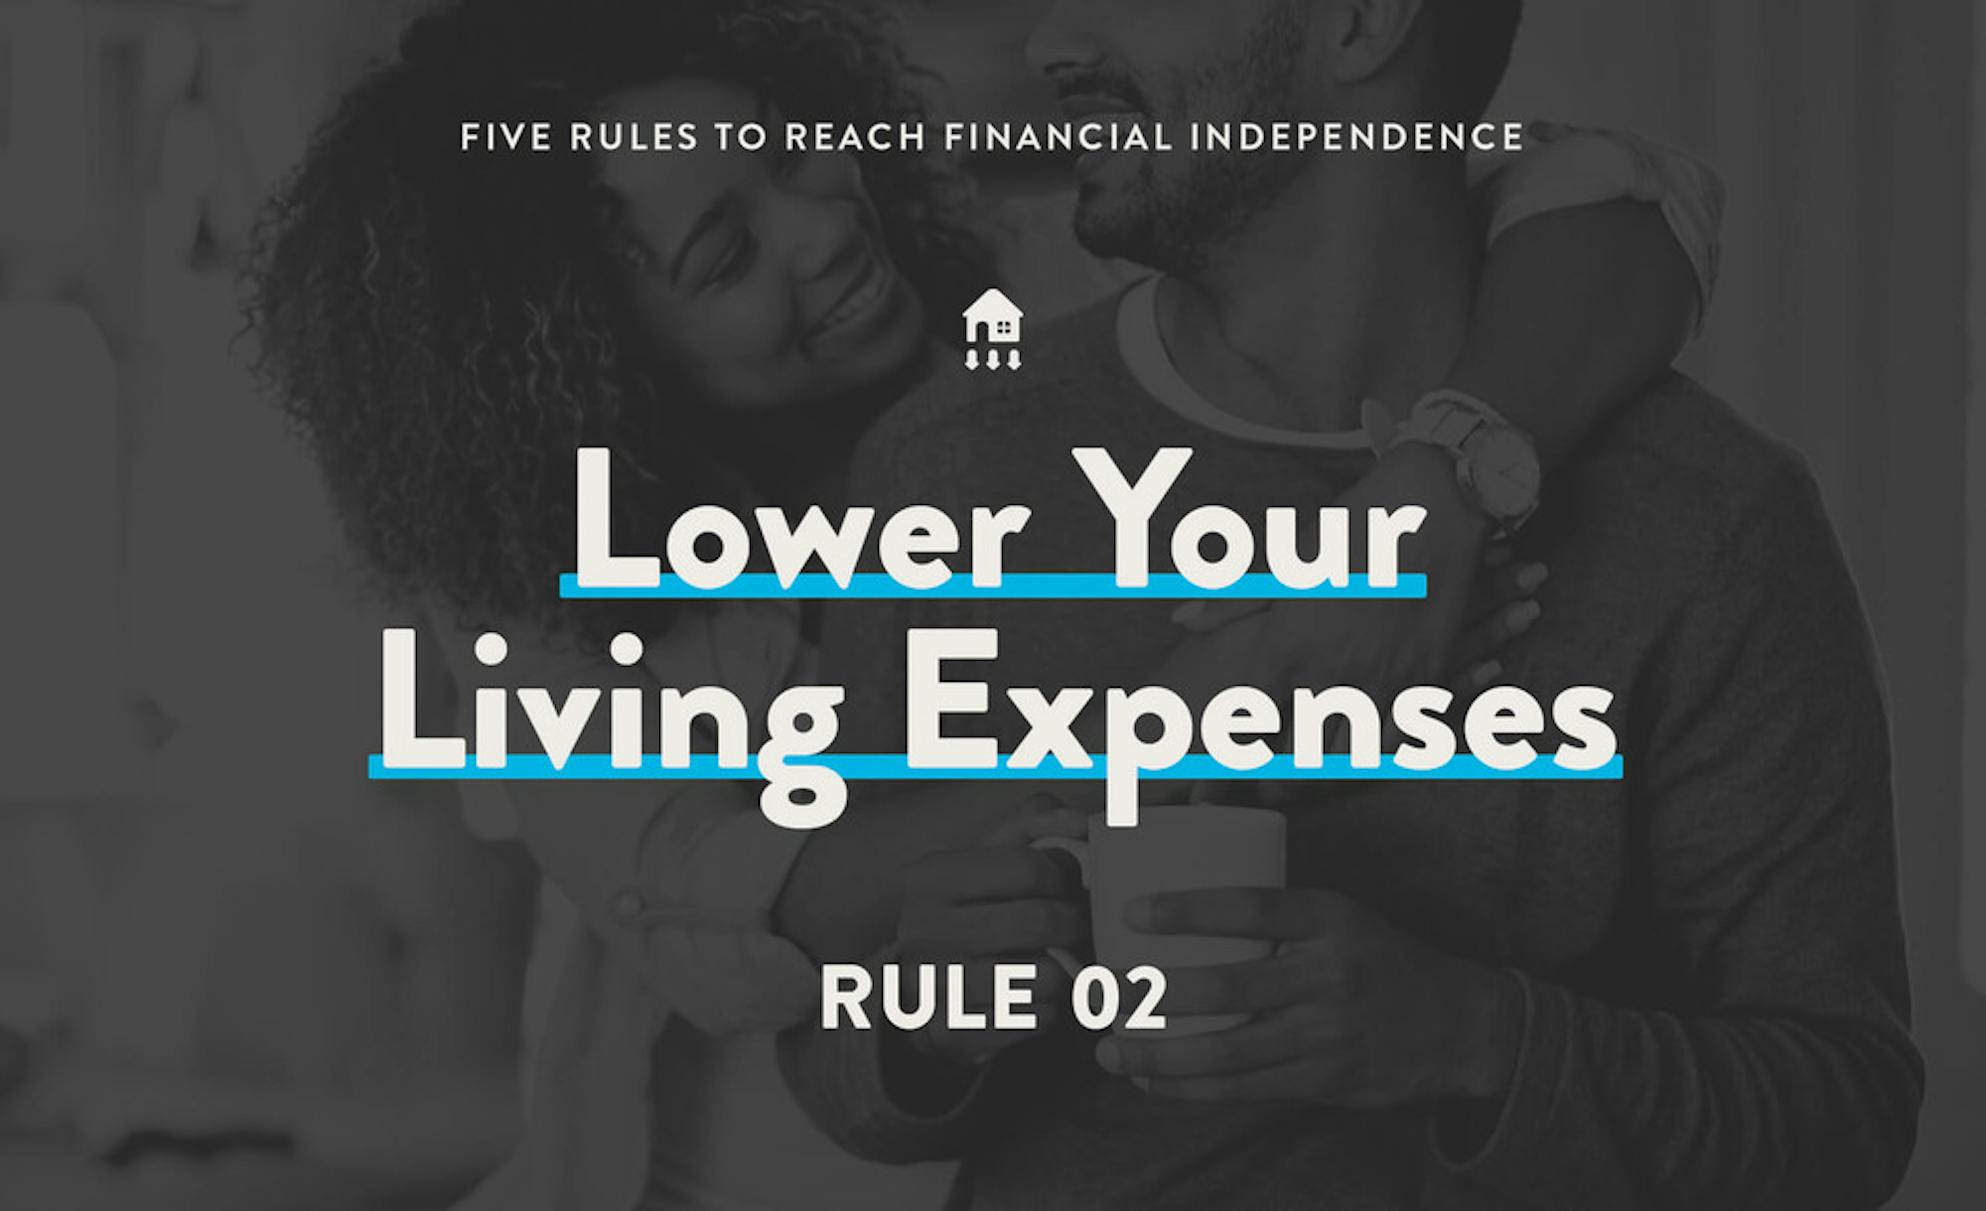 Lower your living expenses to be financially independent